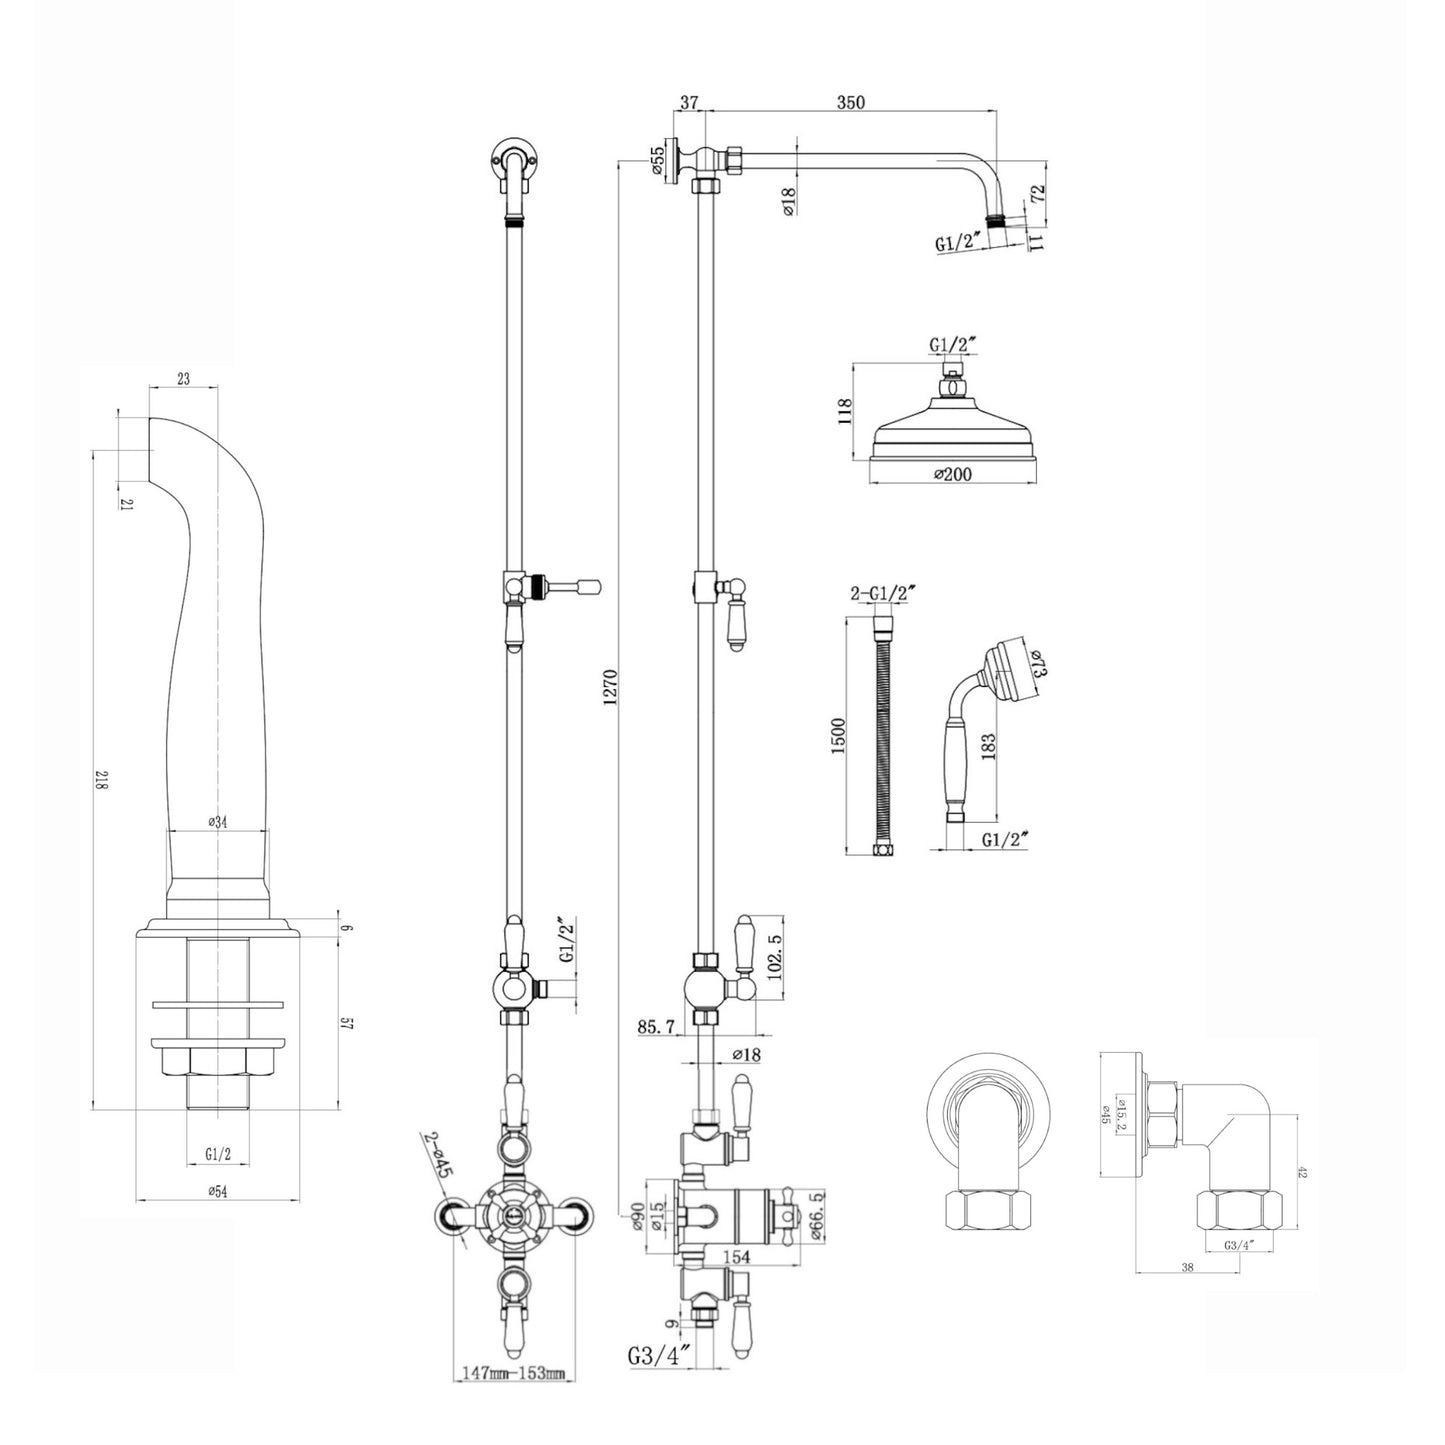 Downton Exposed Traditional Thermostatic Shower Set 3 Outlet, Incl. Triple Shower Valve, Rigid Riser Rail, 200mm Shower Head, Handset & Bath Filler - Chrome And White